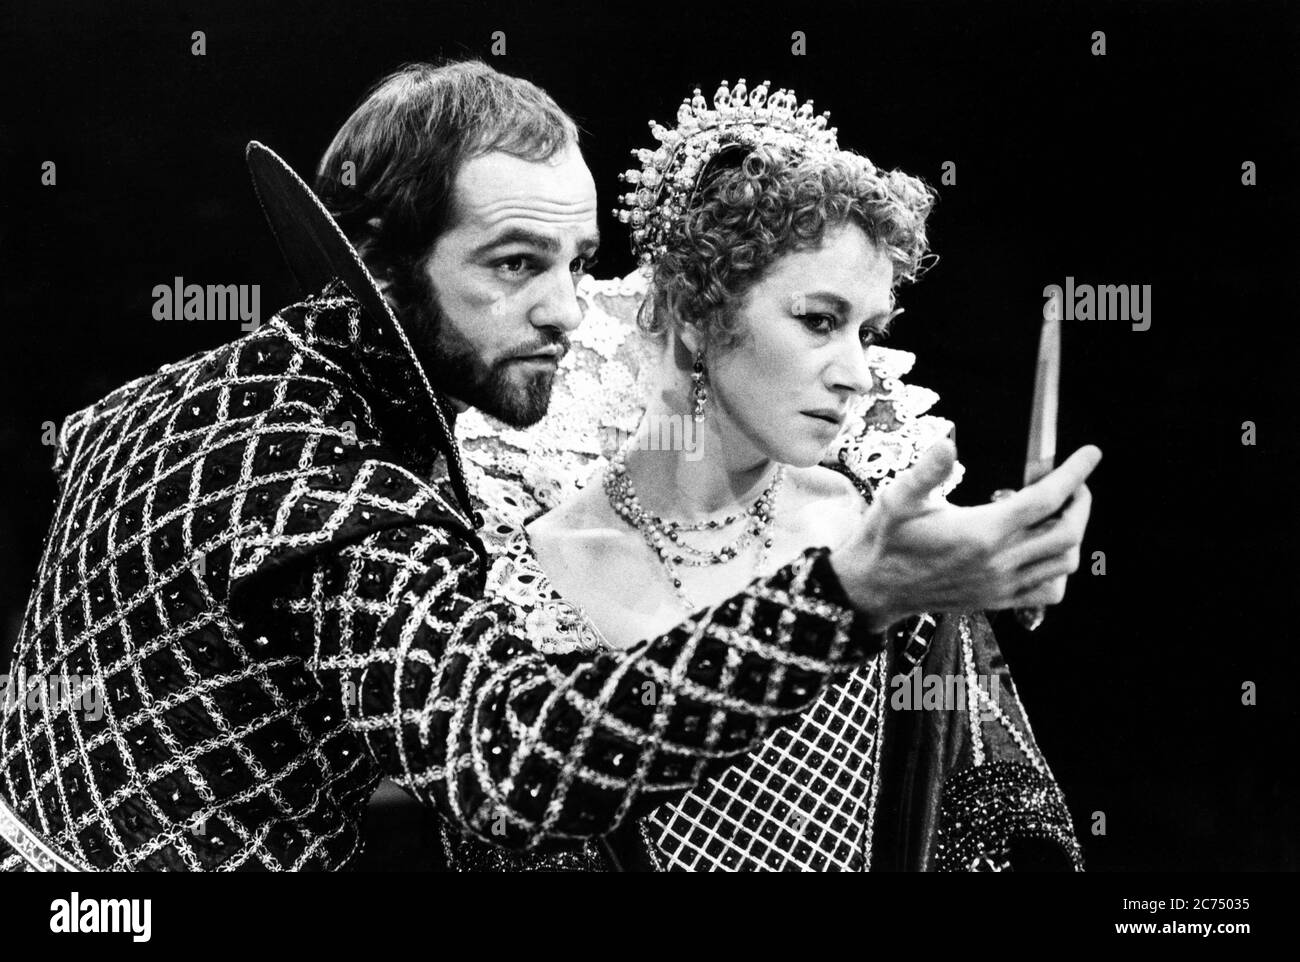 Mike Gwilym (Ferdinand), Helen Mirren (The Duchess of Malfi) in THE DUCHESS OF MALFI by John Webster at the Royal Exchange Theatre, Manchester 16/09/1980  transferred to the Roundhouse, London NW1  01/04/1981  design: Bob Crowley   lighting: Geoffrey Joyce   director: Adrian Noble Stock Photo